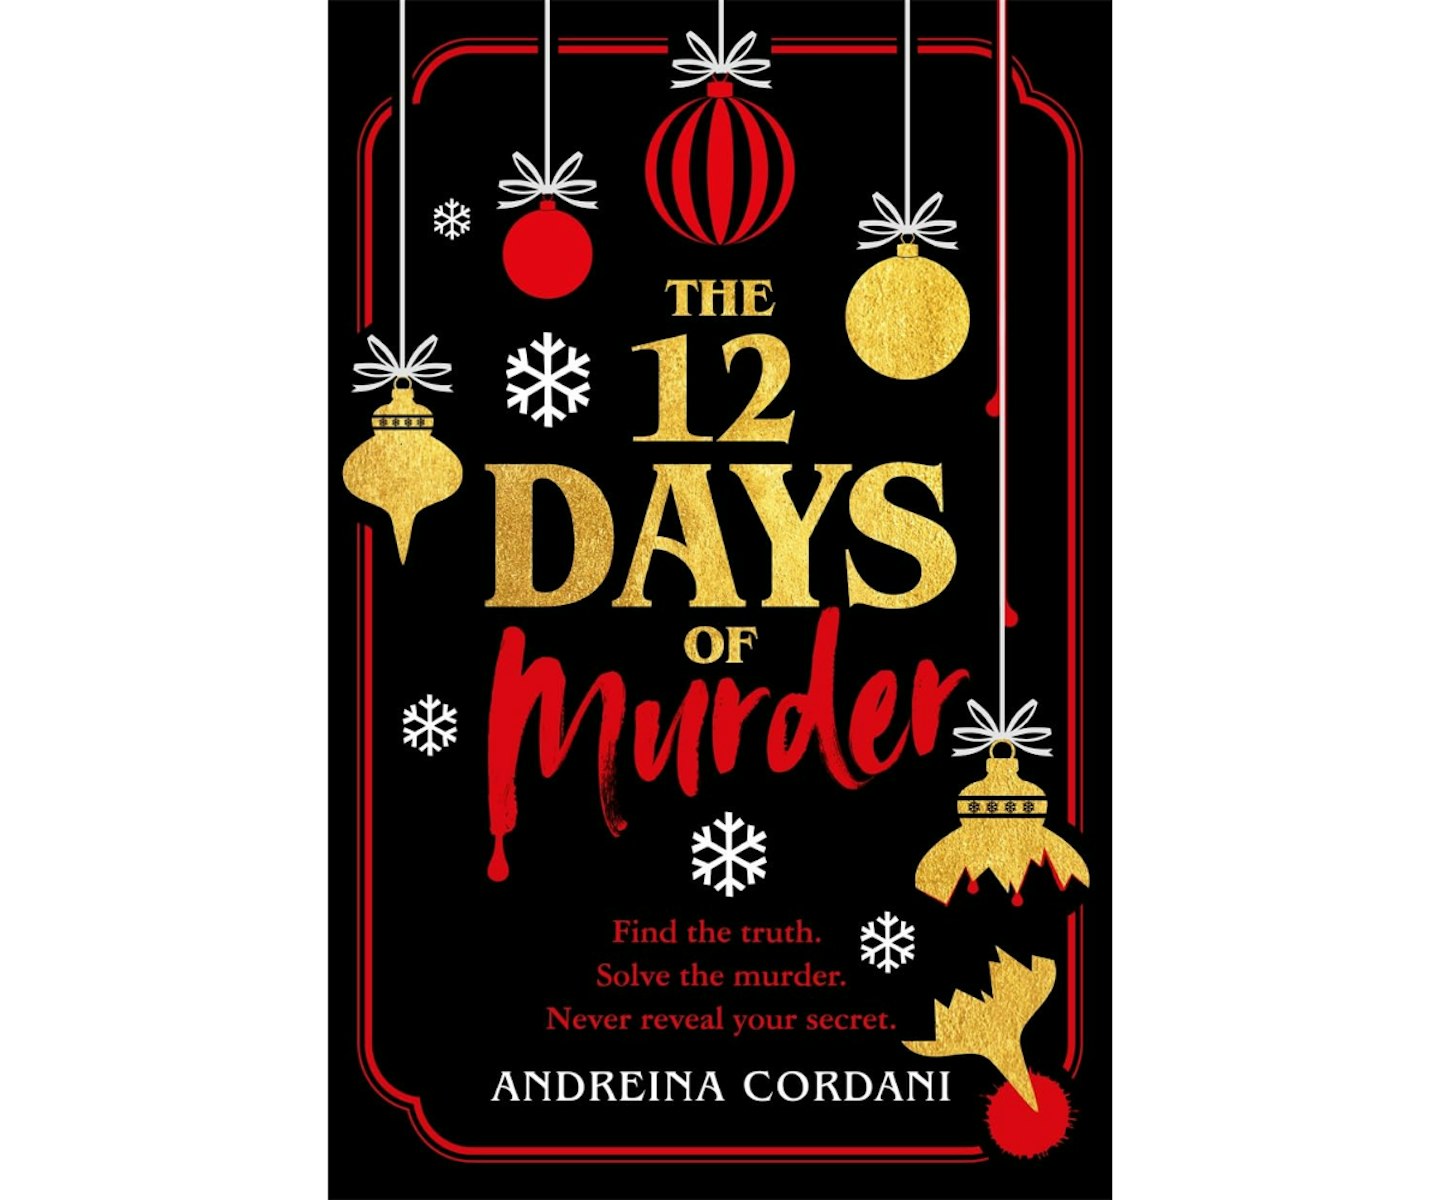 The Twleve Days of Murder by Andreina Cordani